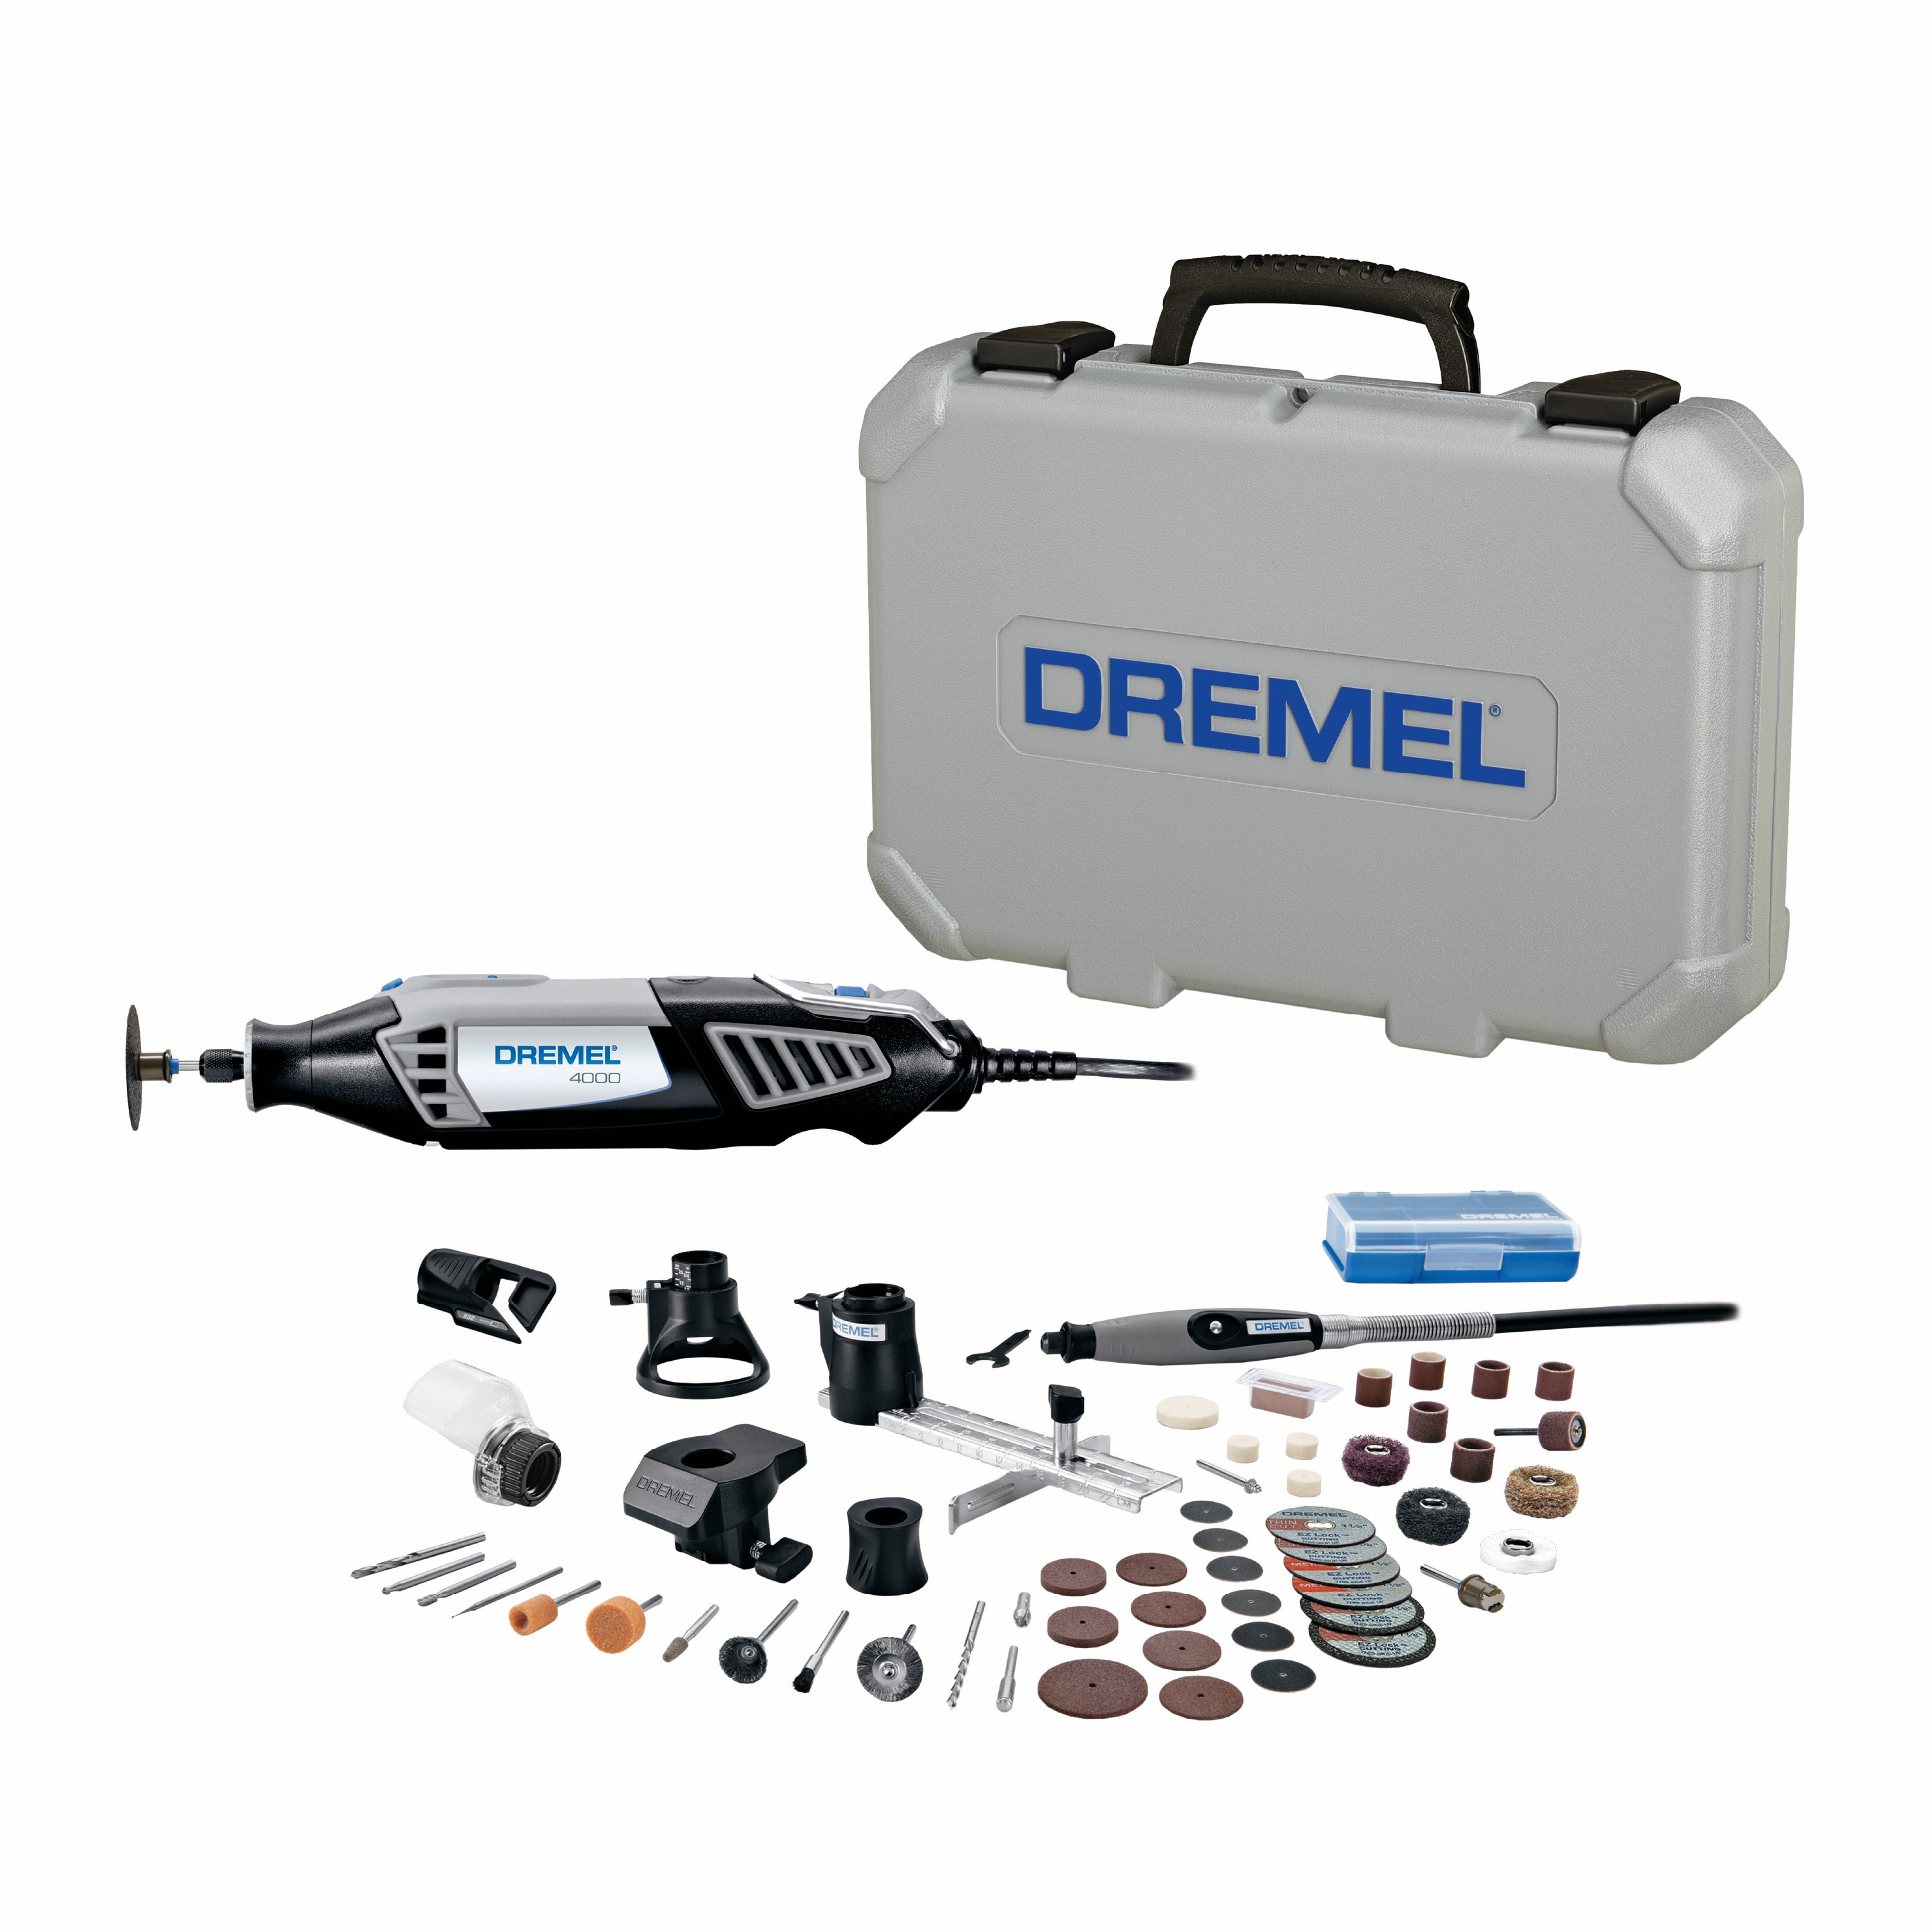 4300 Series 1.8 Amp Variable Speed Corded Rotary Tool Kit w/ Mounted Light,  40 Accessories, 5 Attachments, Carrying Case